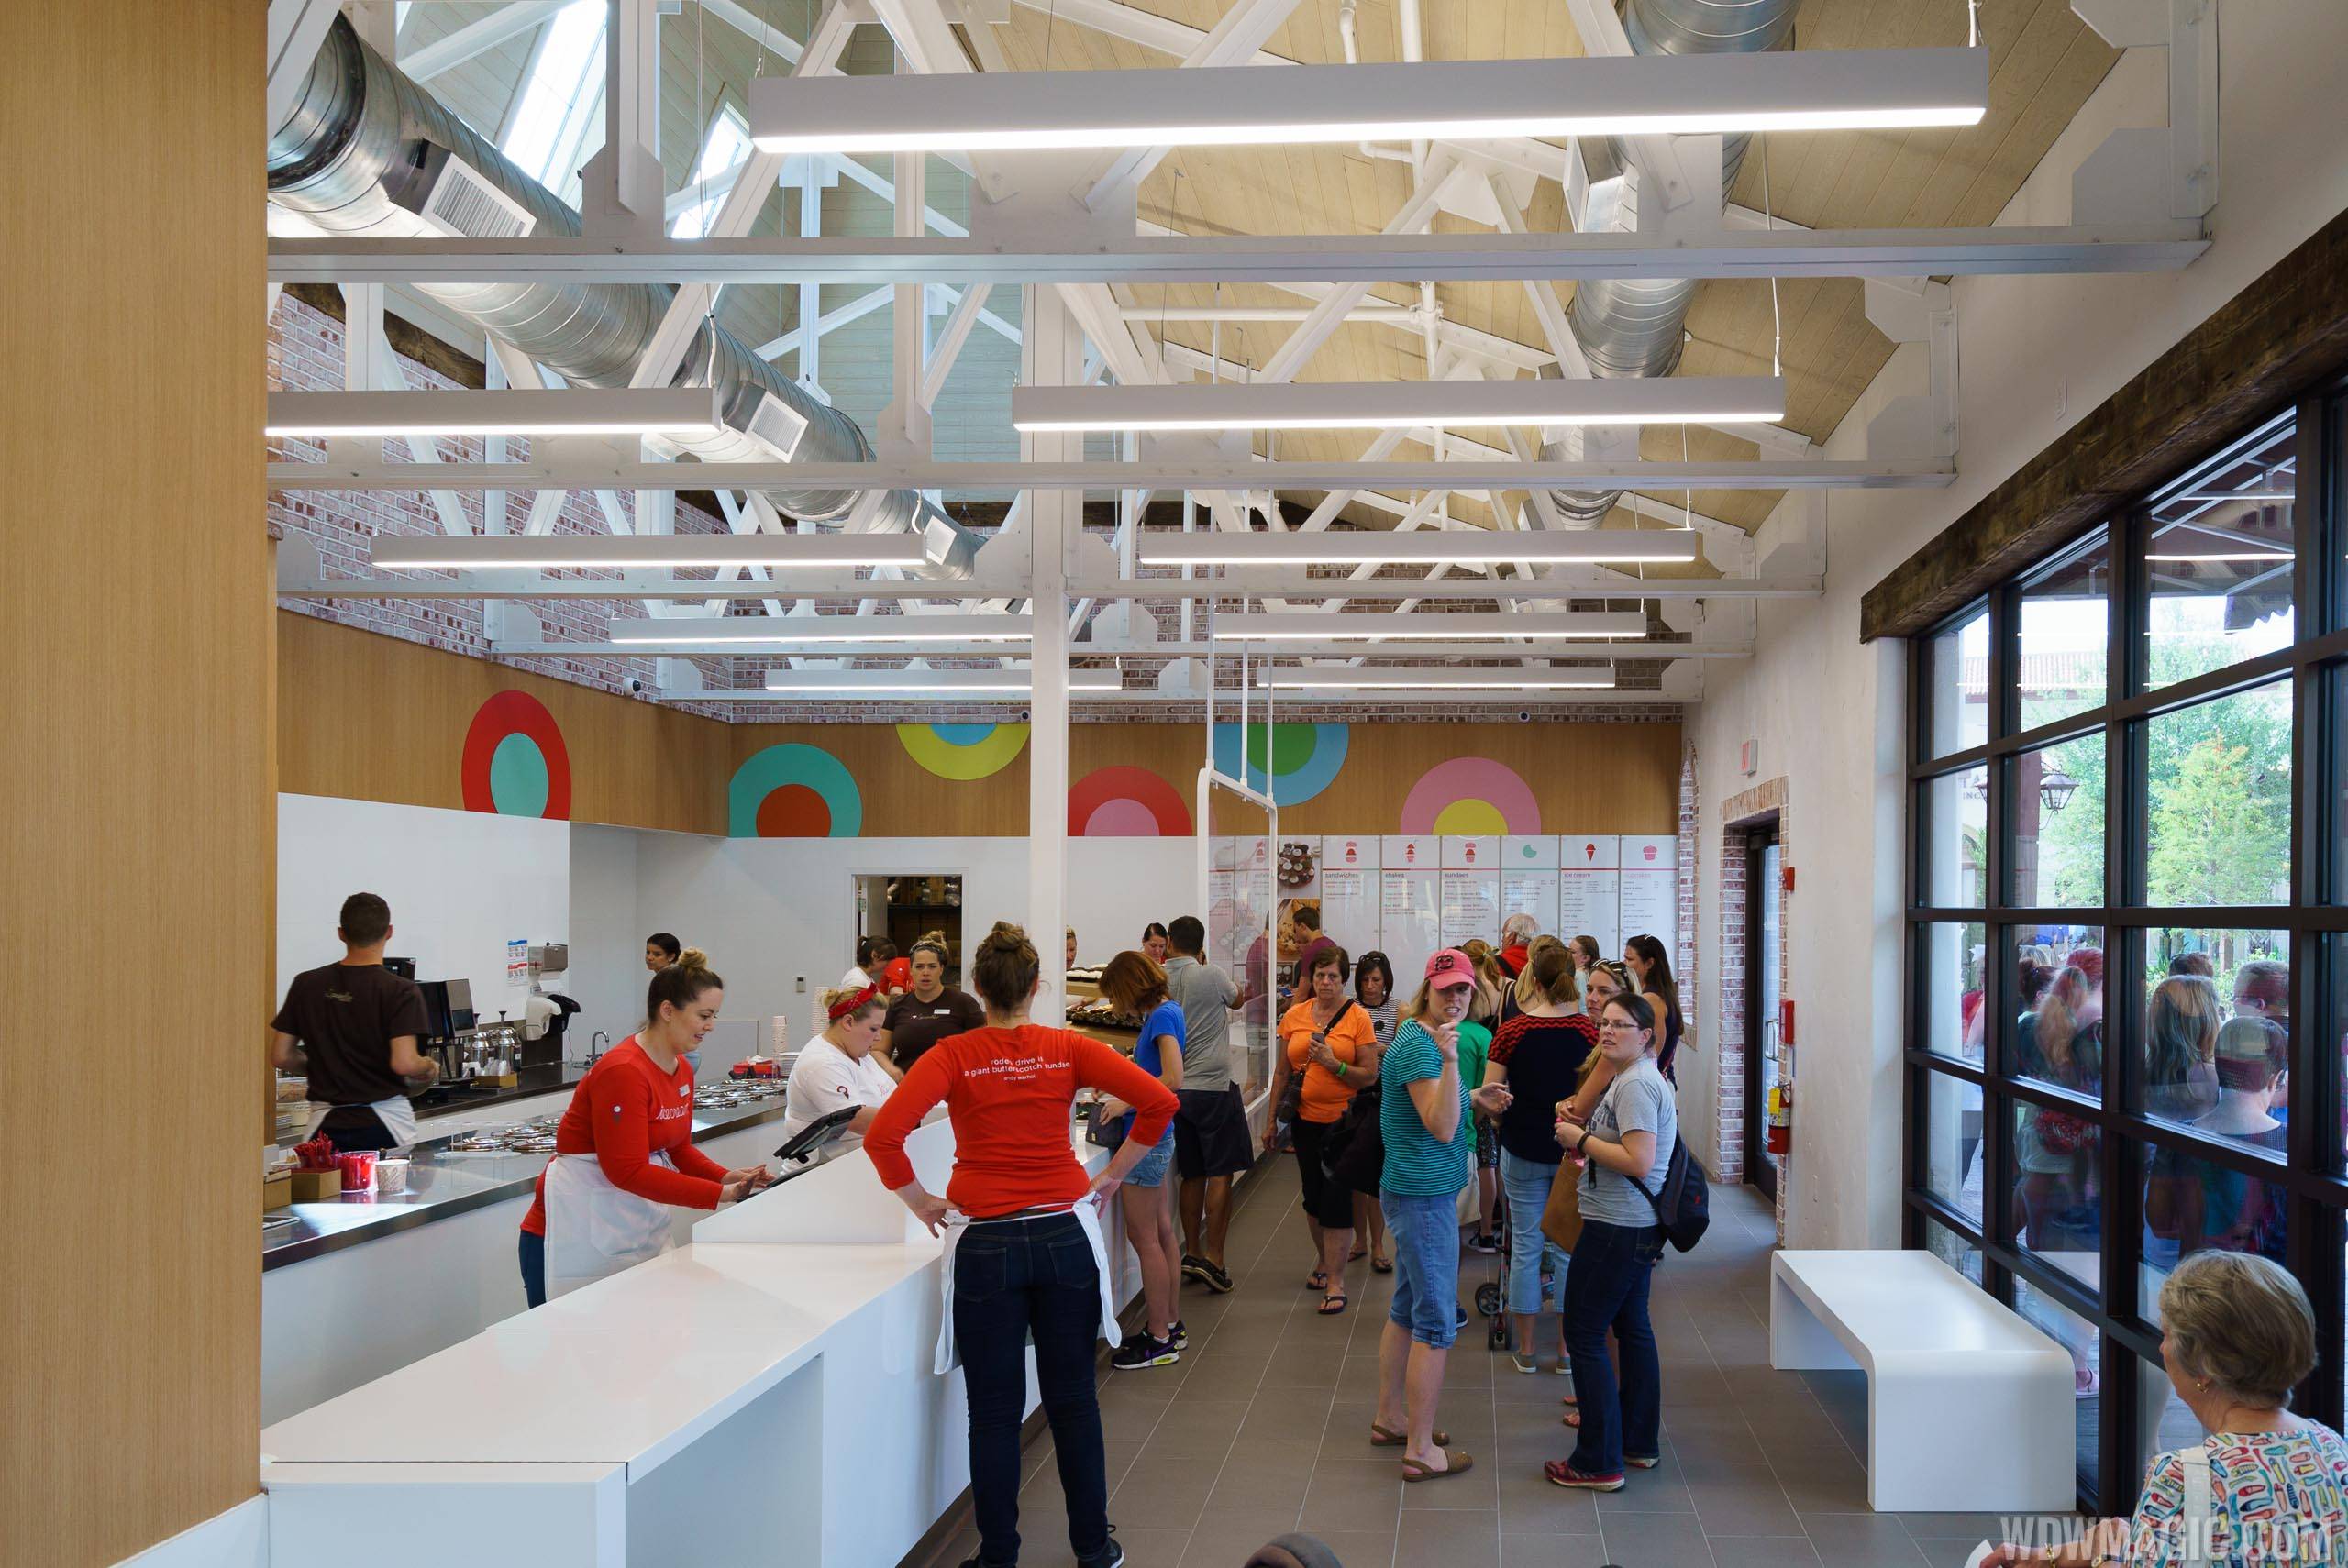 Overview of the interior space at Sprinkles Disney Springs